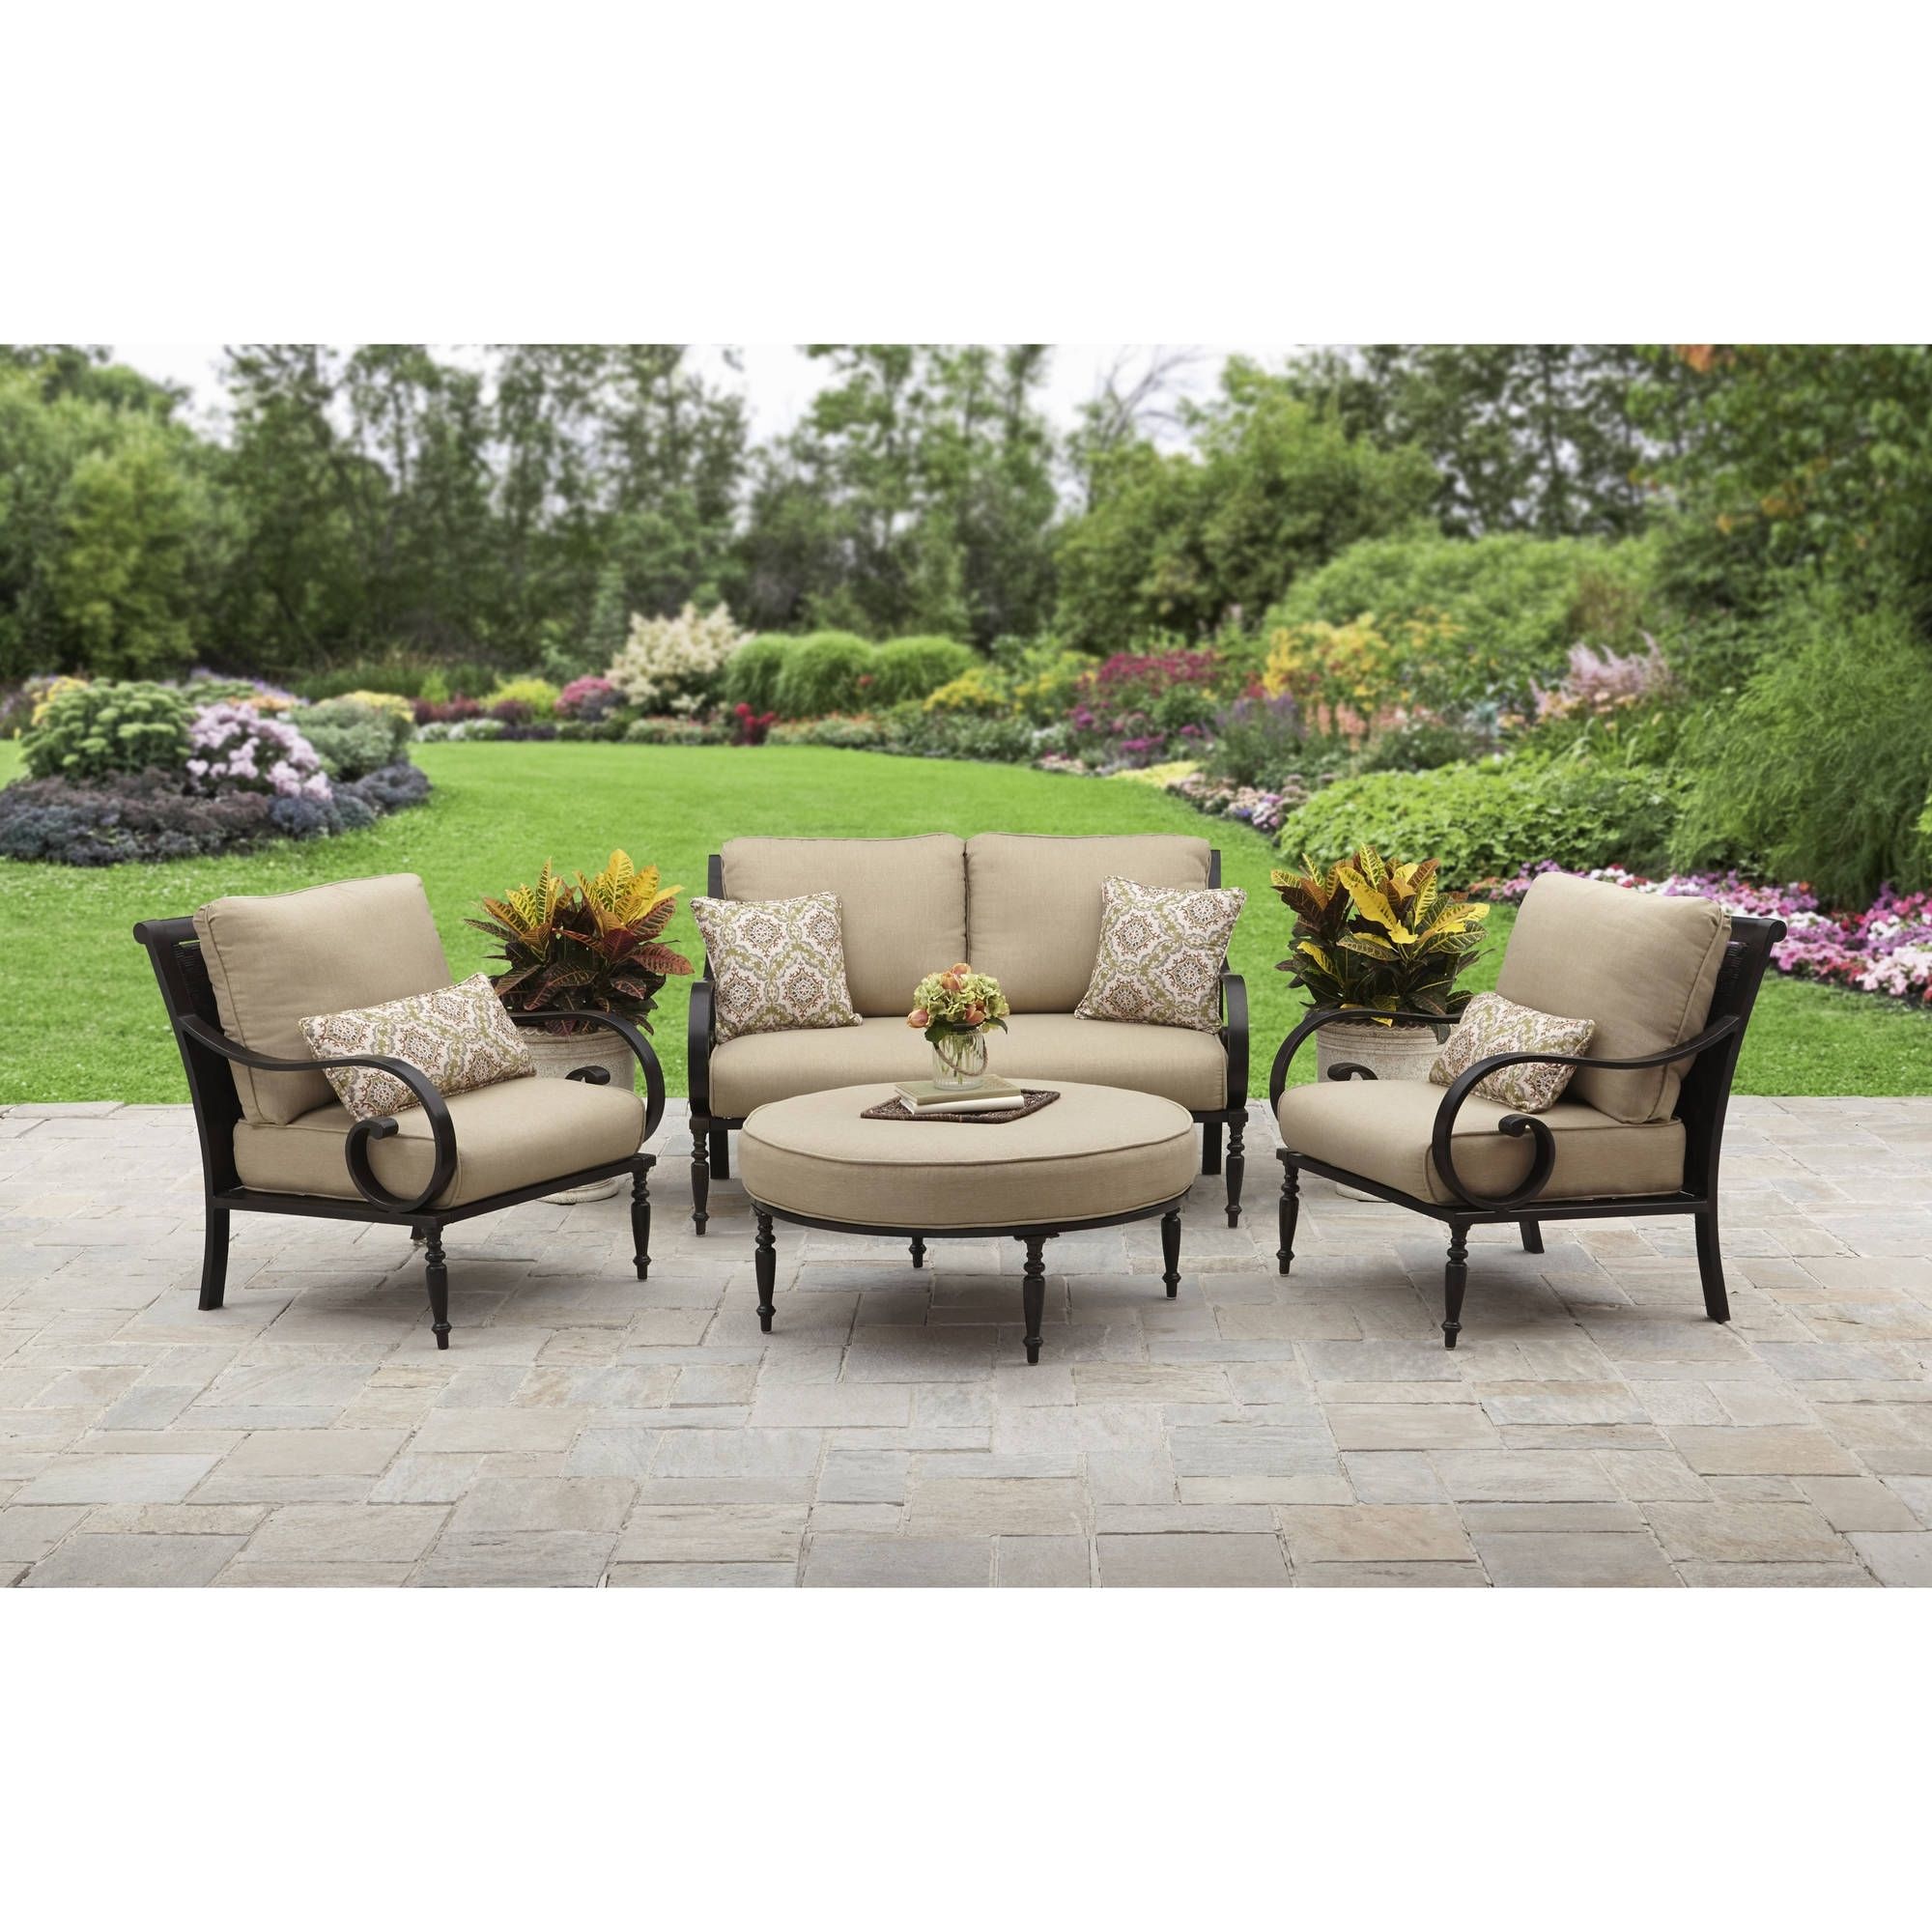 Featured Photo of The 15 Best Collection of Walmart Patio Furniture Conversation Sets